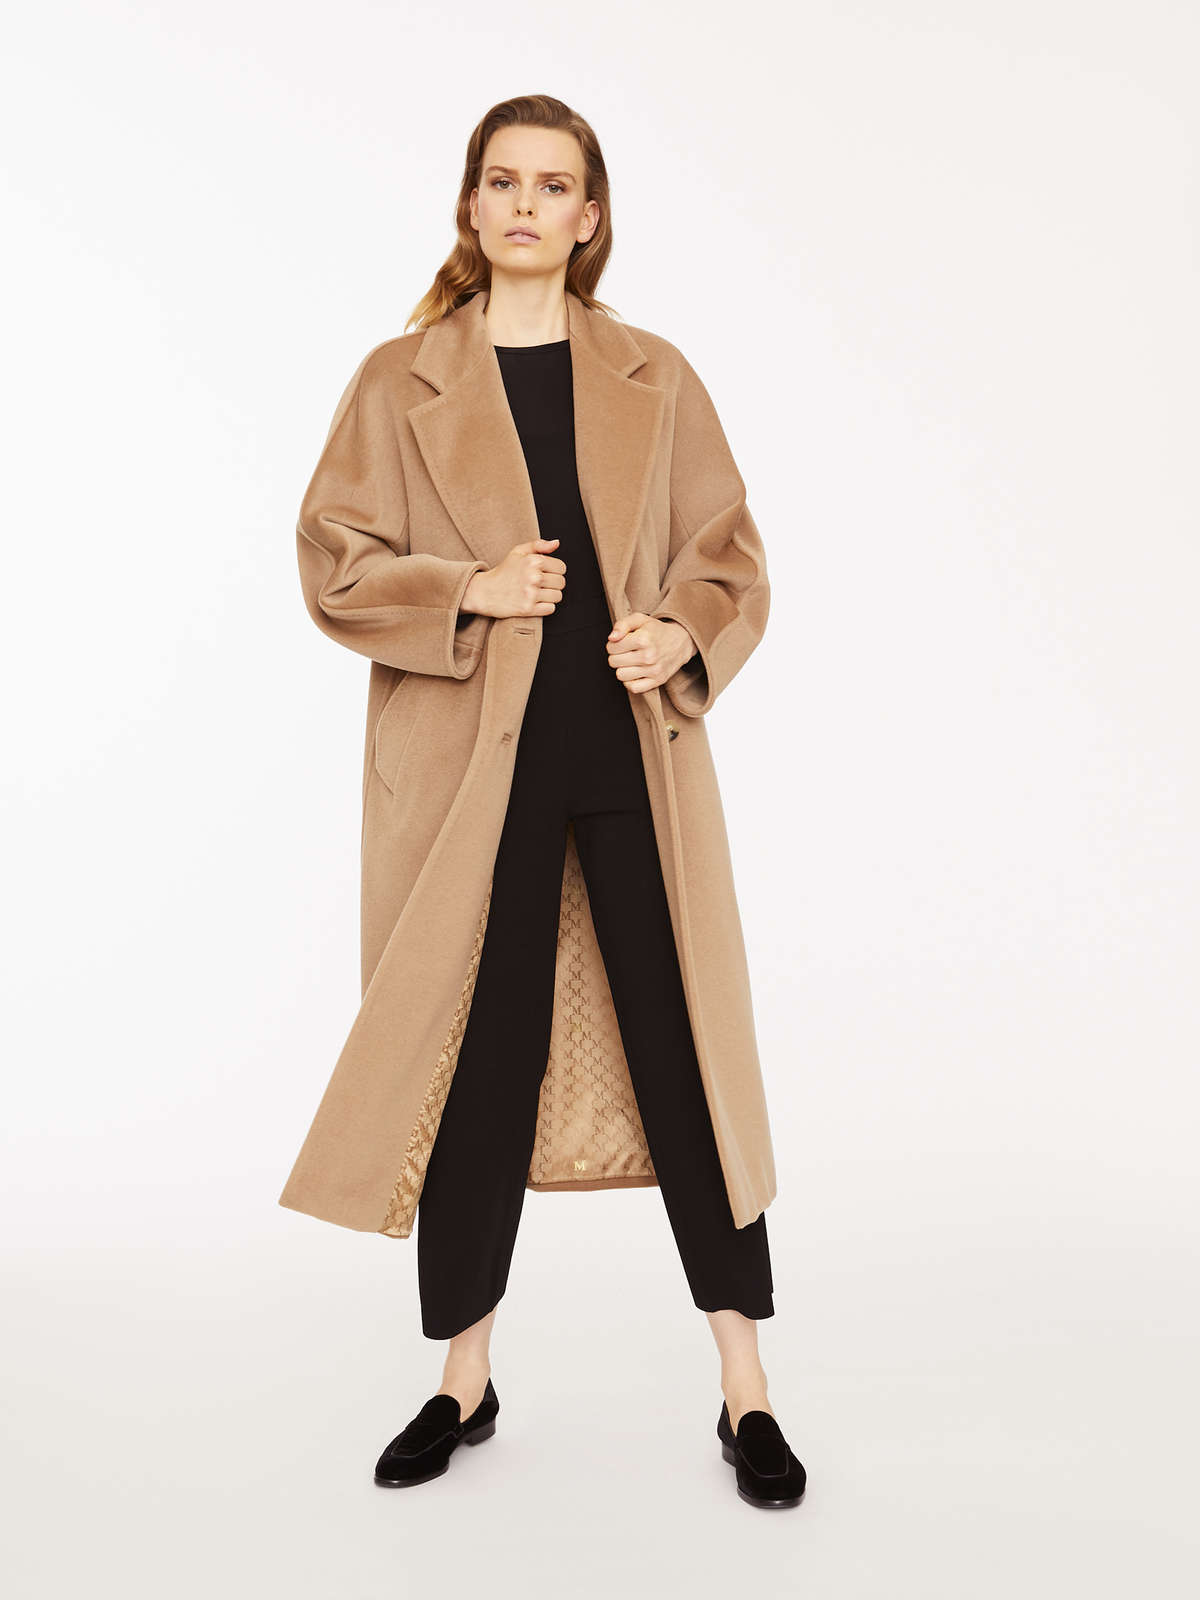 Icon Coat at Vectorified.com | Collection of Icon Coat free for ...